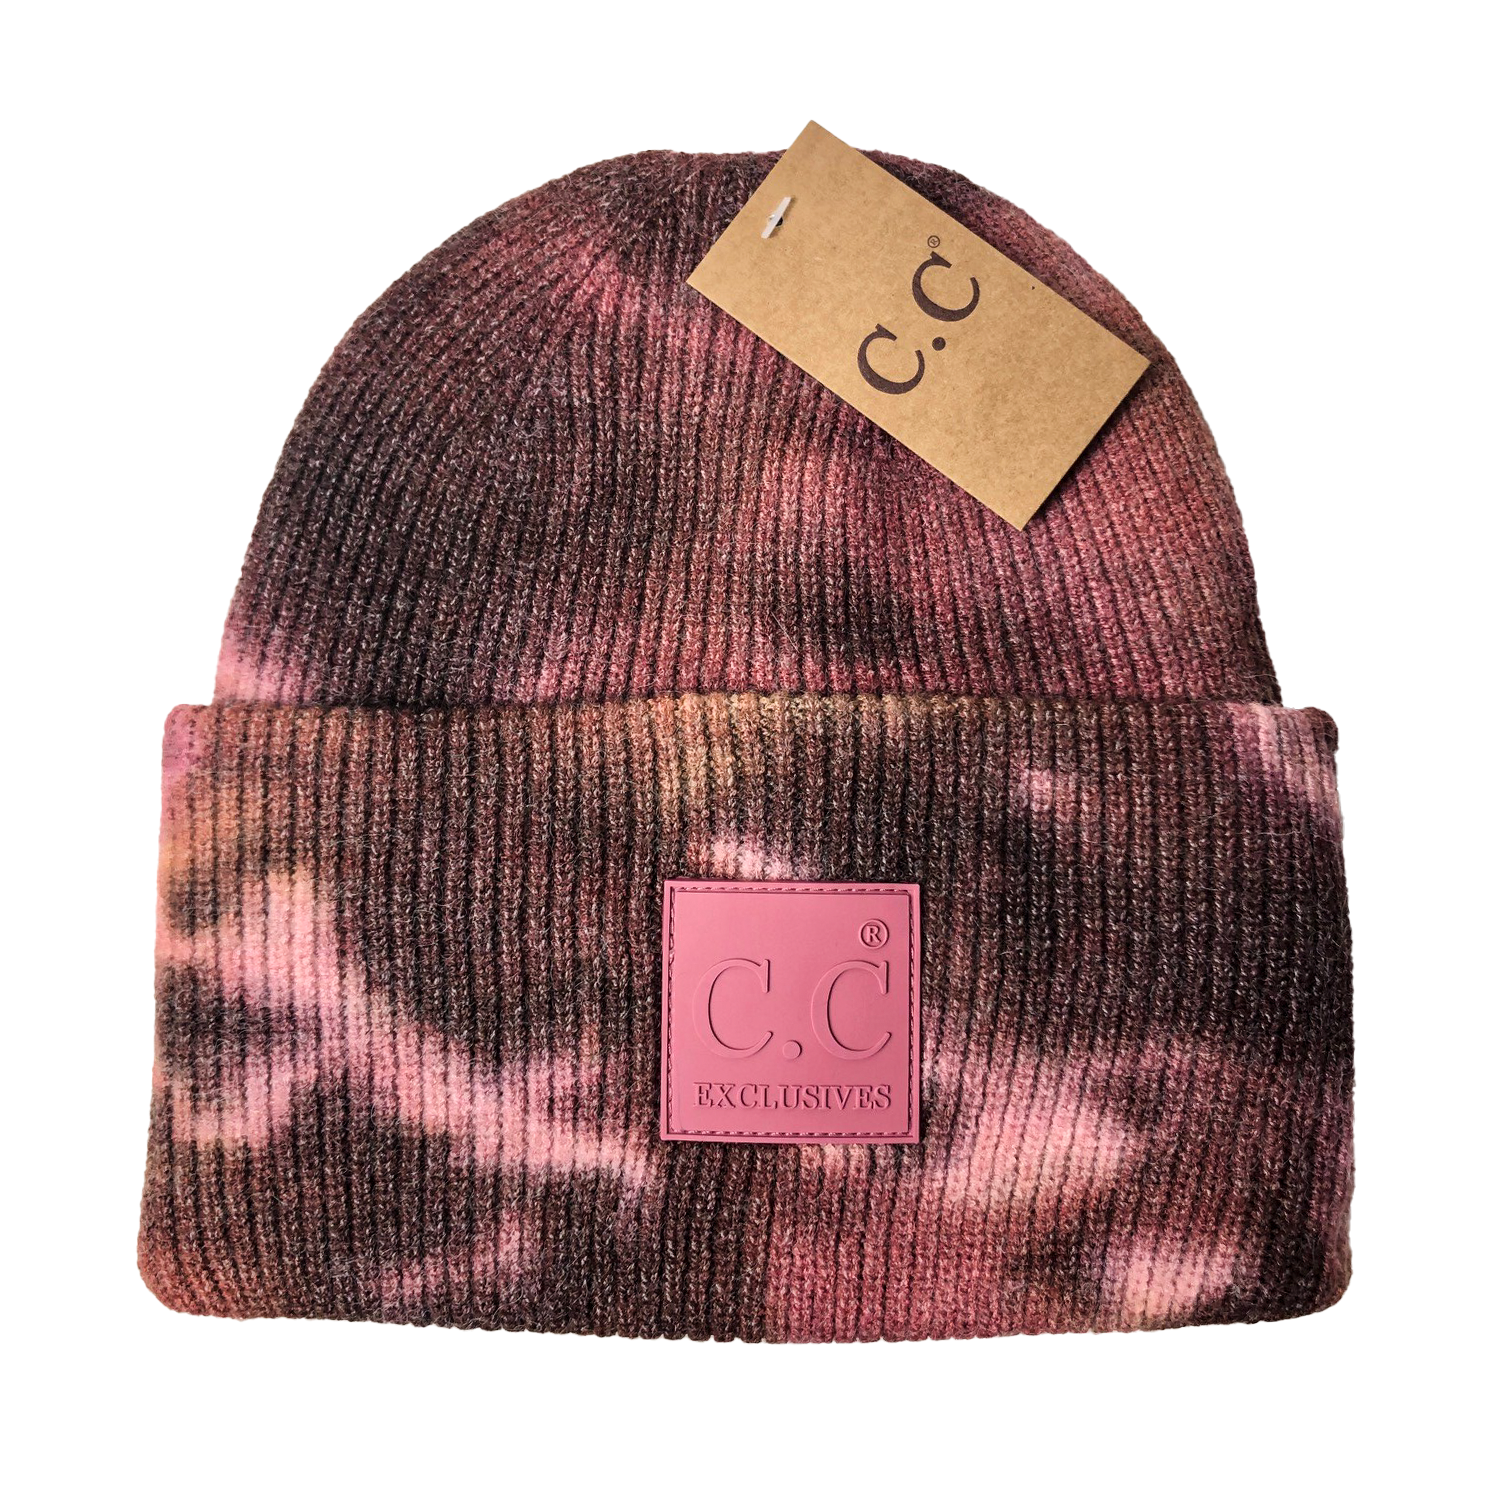 HAT-7380 Tie Dye Beanie with C.C Rubber Patch - Brown/Wild Ginger